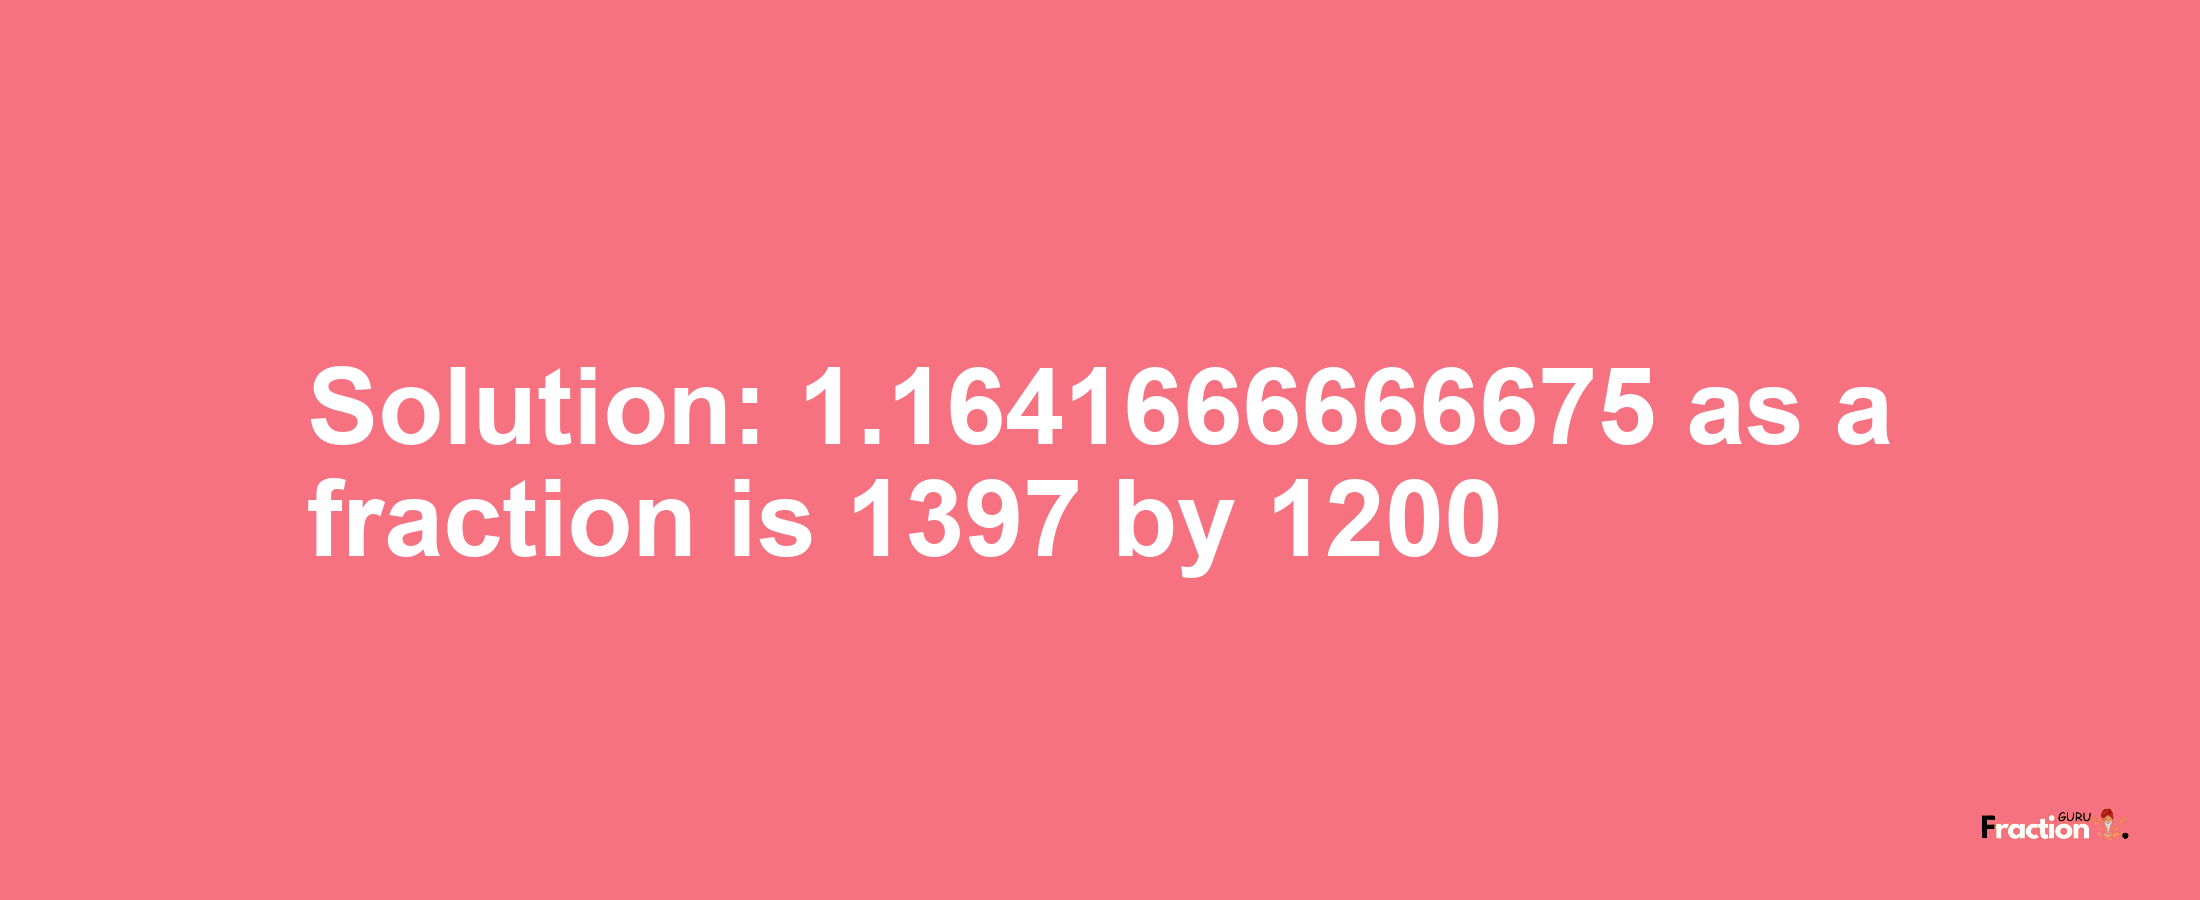 Solution:1.1641666666675 as a fraction is 1397/1200